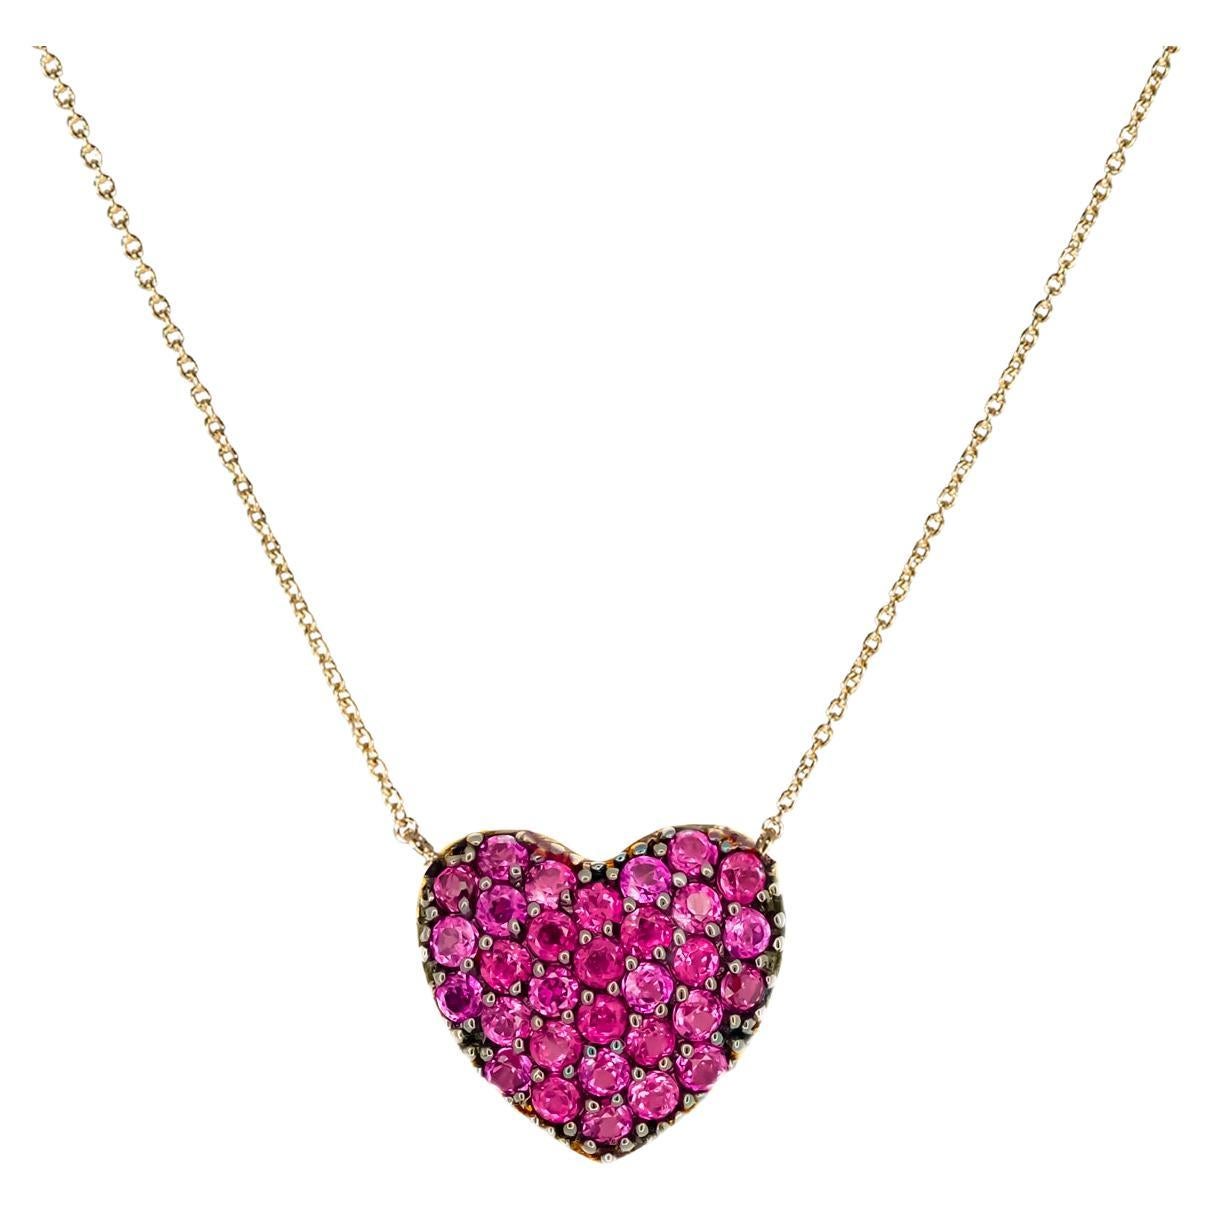 Heart shaped 14k gold pendant necklace.  For Sale